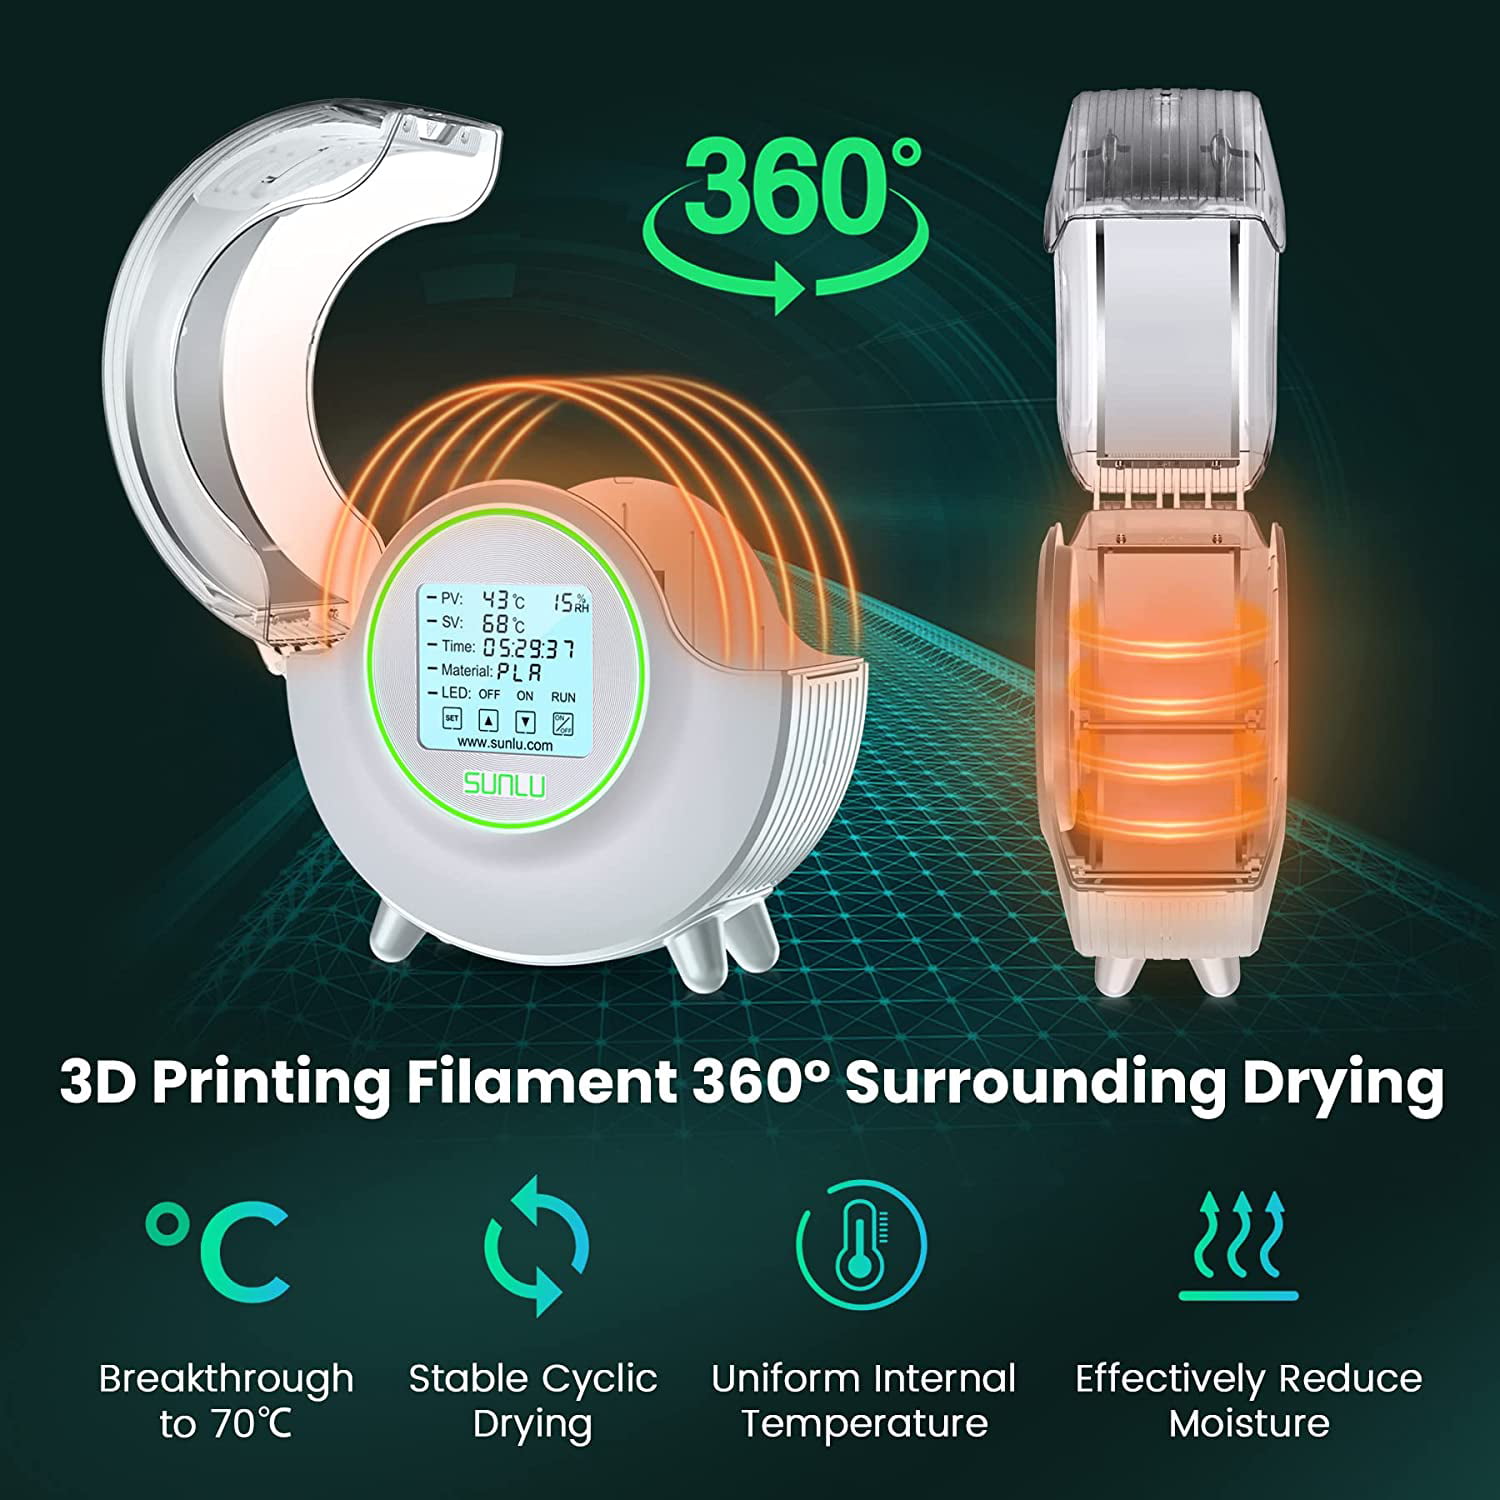 SUNLU S2 3D Filament Dryer Dry Box Up To 70℃ Heating 360° Surround Drying  Evenly LED Touch Screen Display Humidity Printer Mate